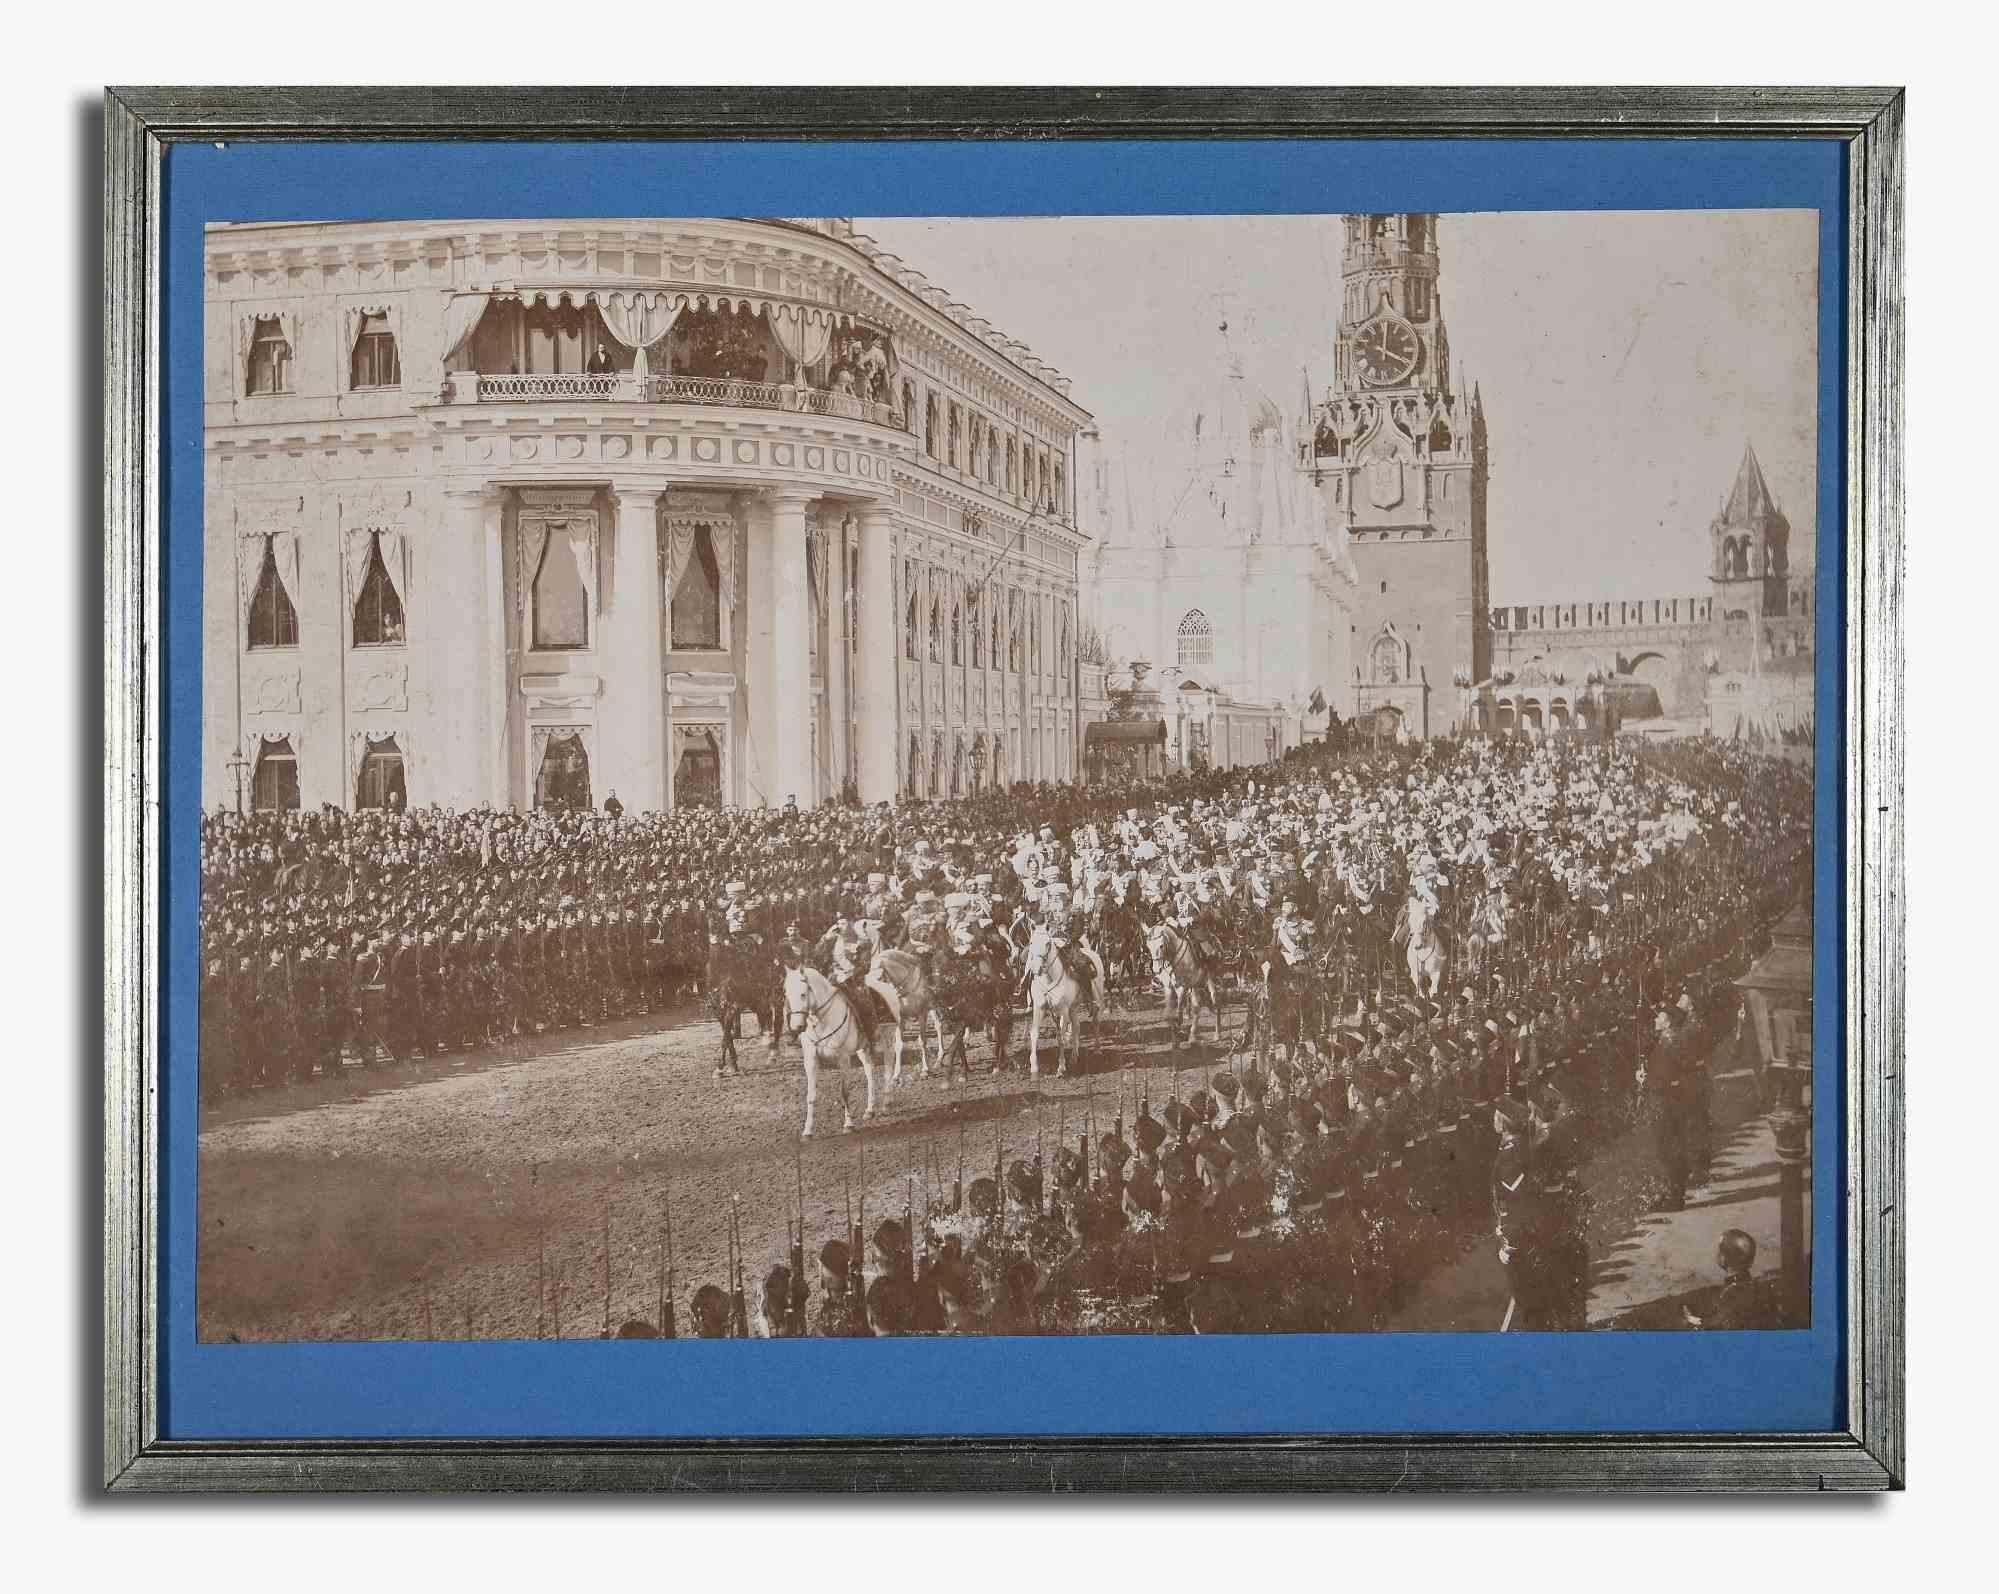 Moscow parade is an original modern artwork realized in the end of 19th century by Karl Bulla.

Original black and white photograph.

The artwork depicts a parade in Moscow.

Includes frame (fair conditions): 36.5 x 46.5 cm

